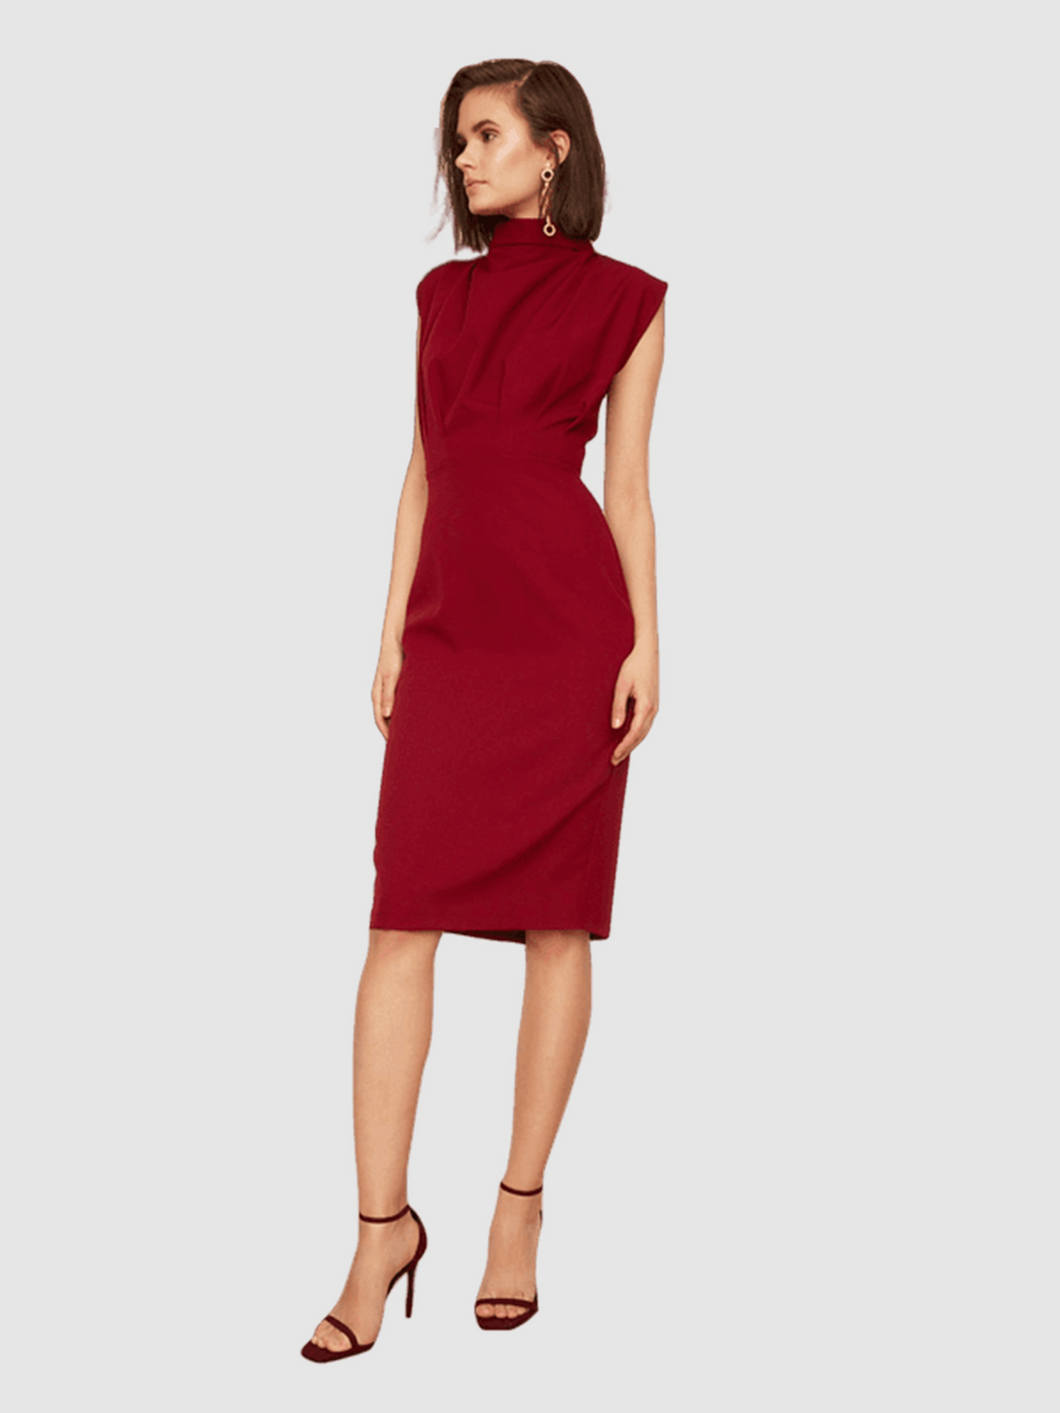 CLARET RED COLLARED DRESS